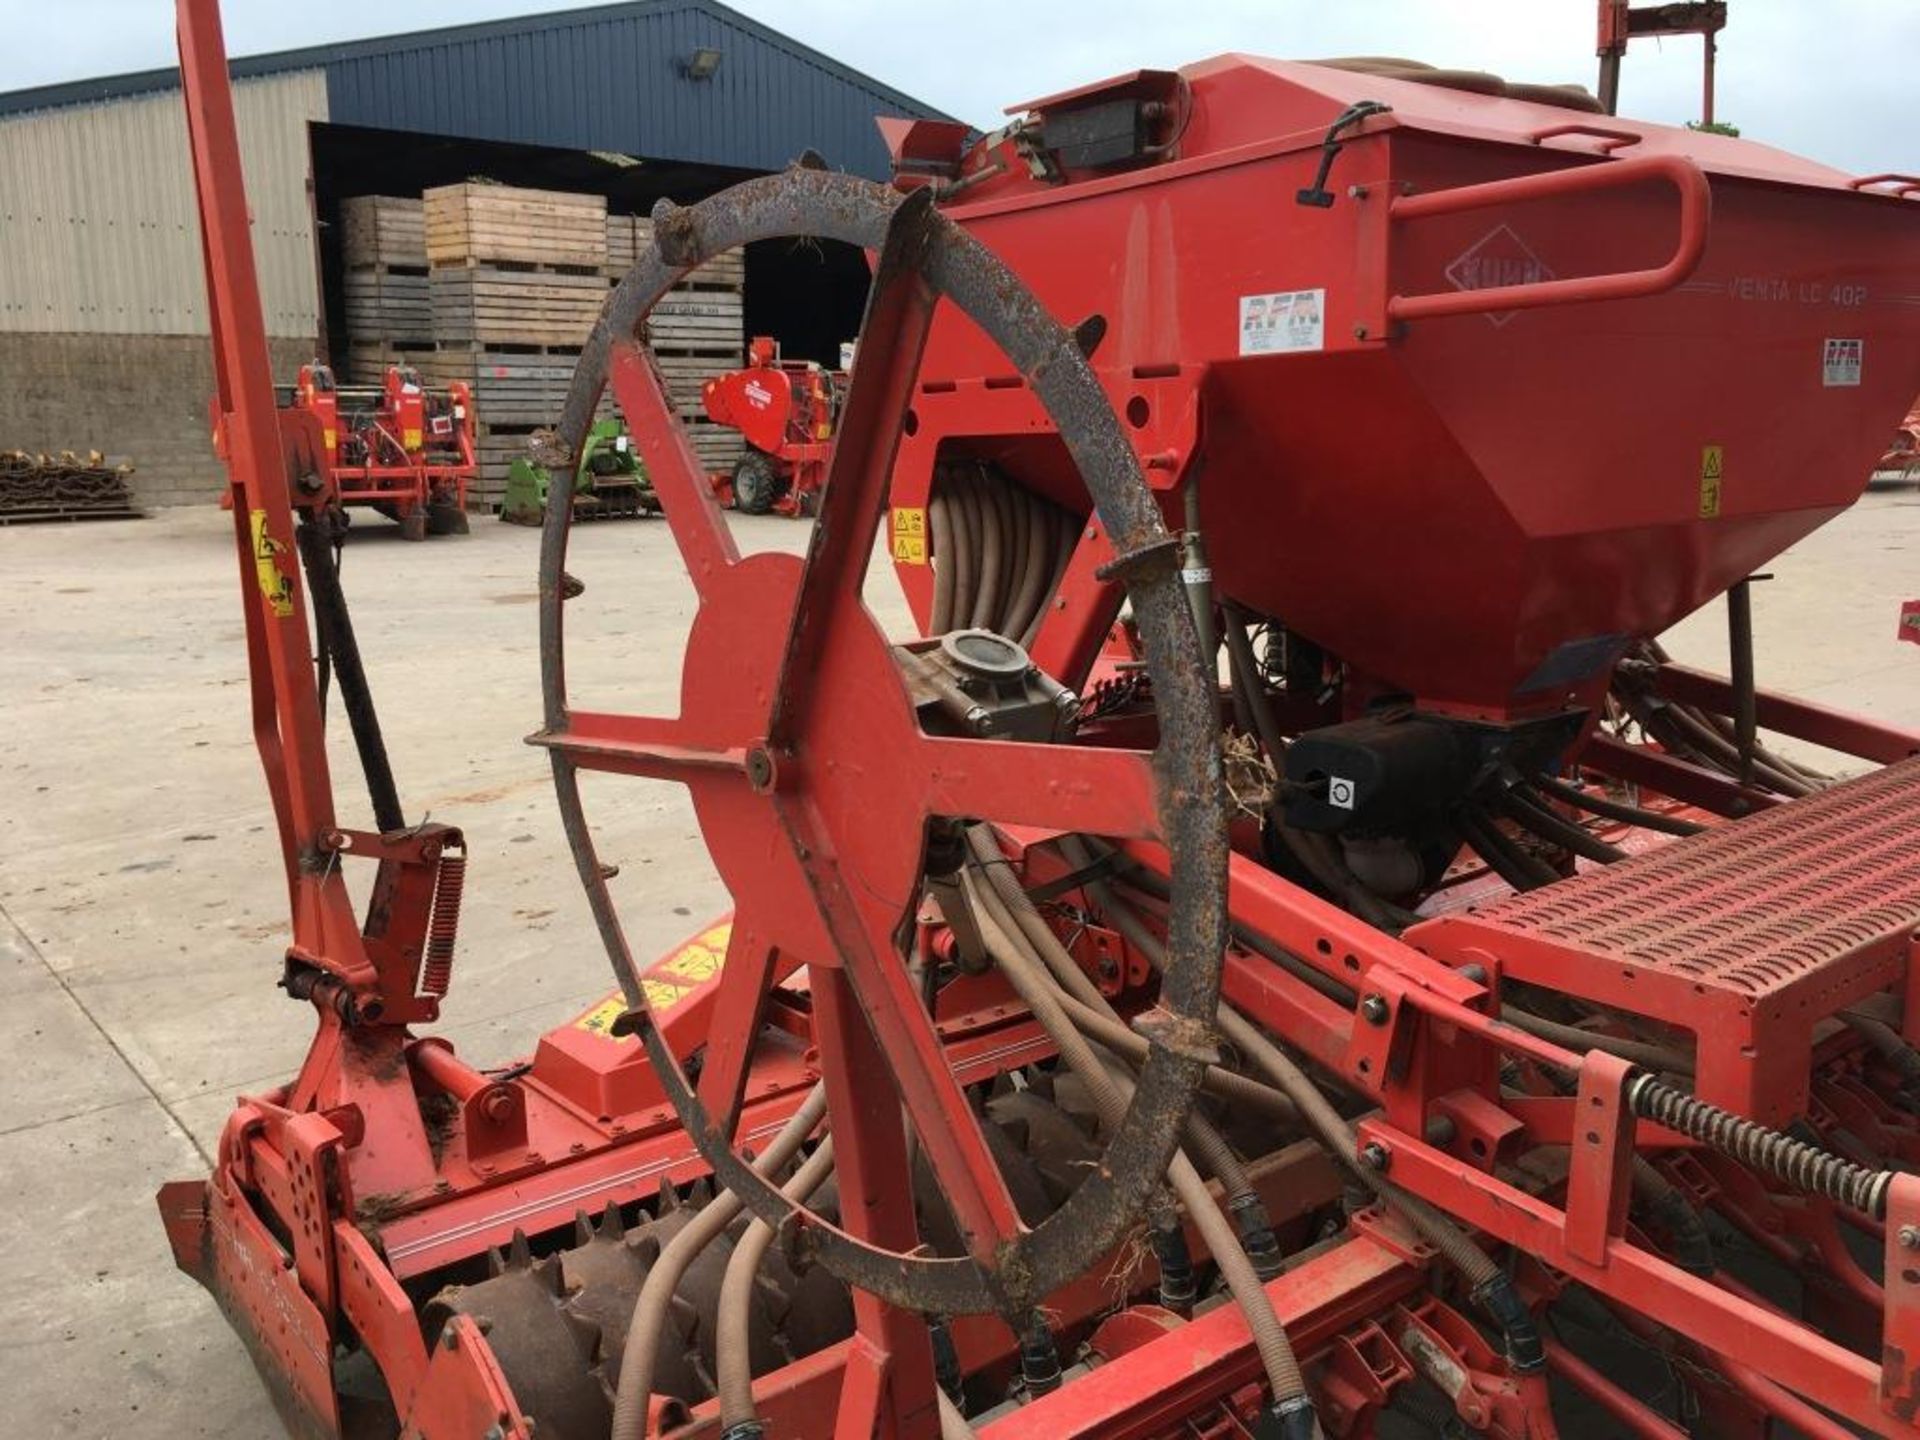 Kuhn HR 4003D 14' power harrow, serial number: A4631 (2002) with Kuhn Venta LC 402 seed drill, - Bild 12 aus 15